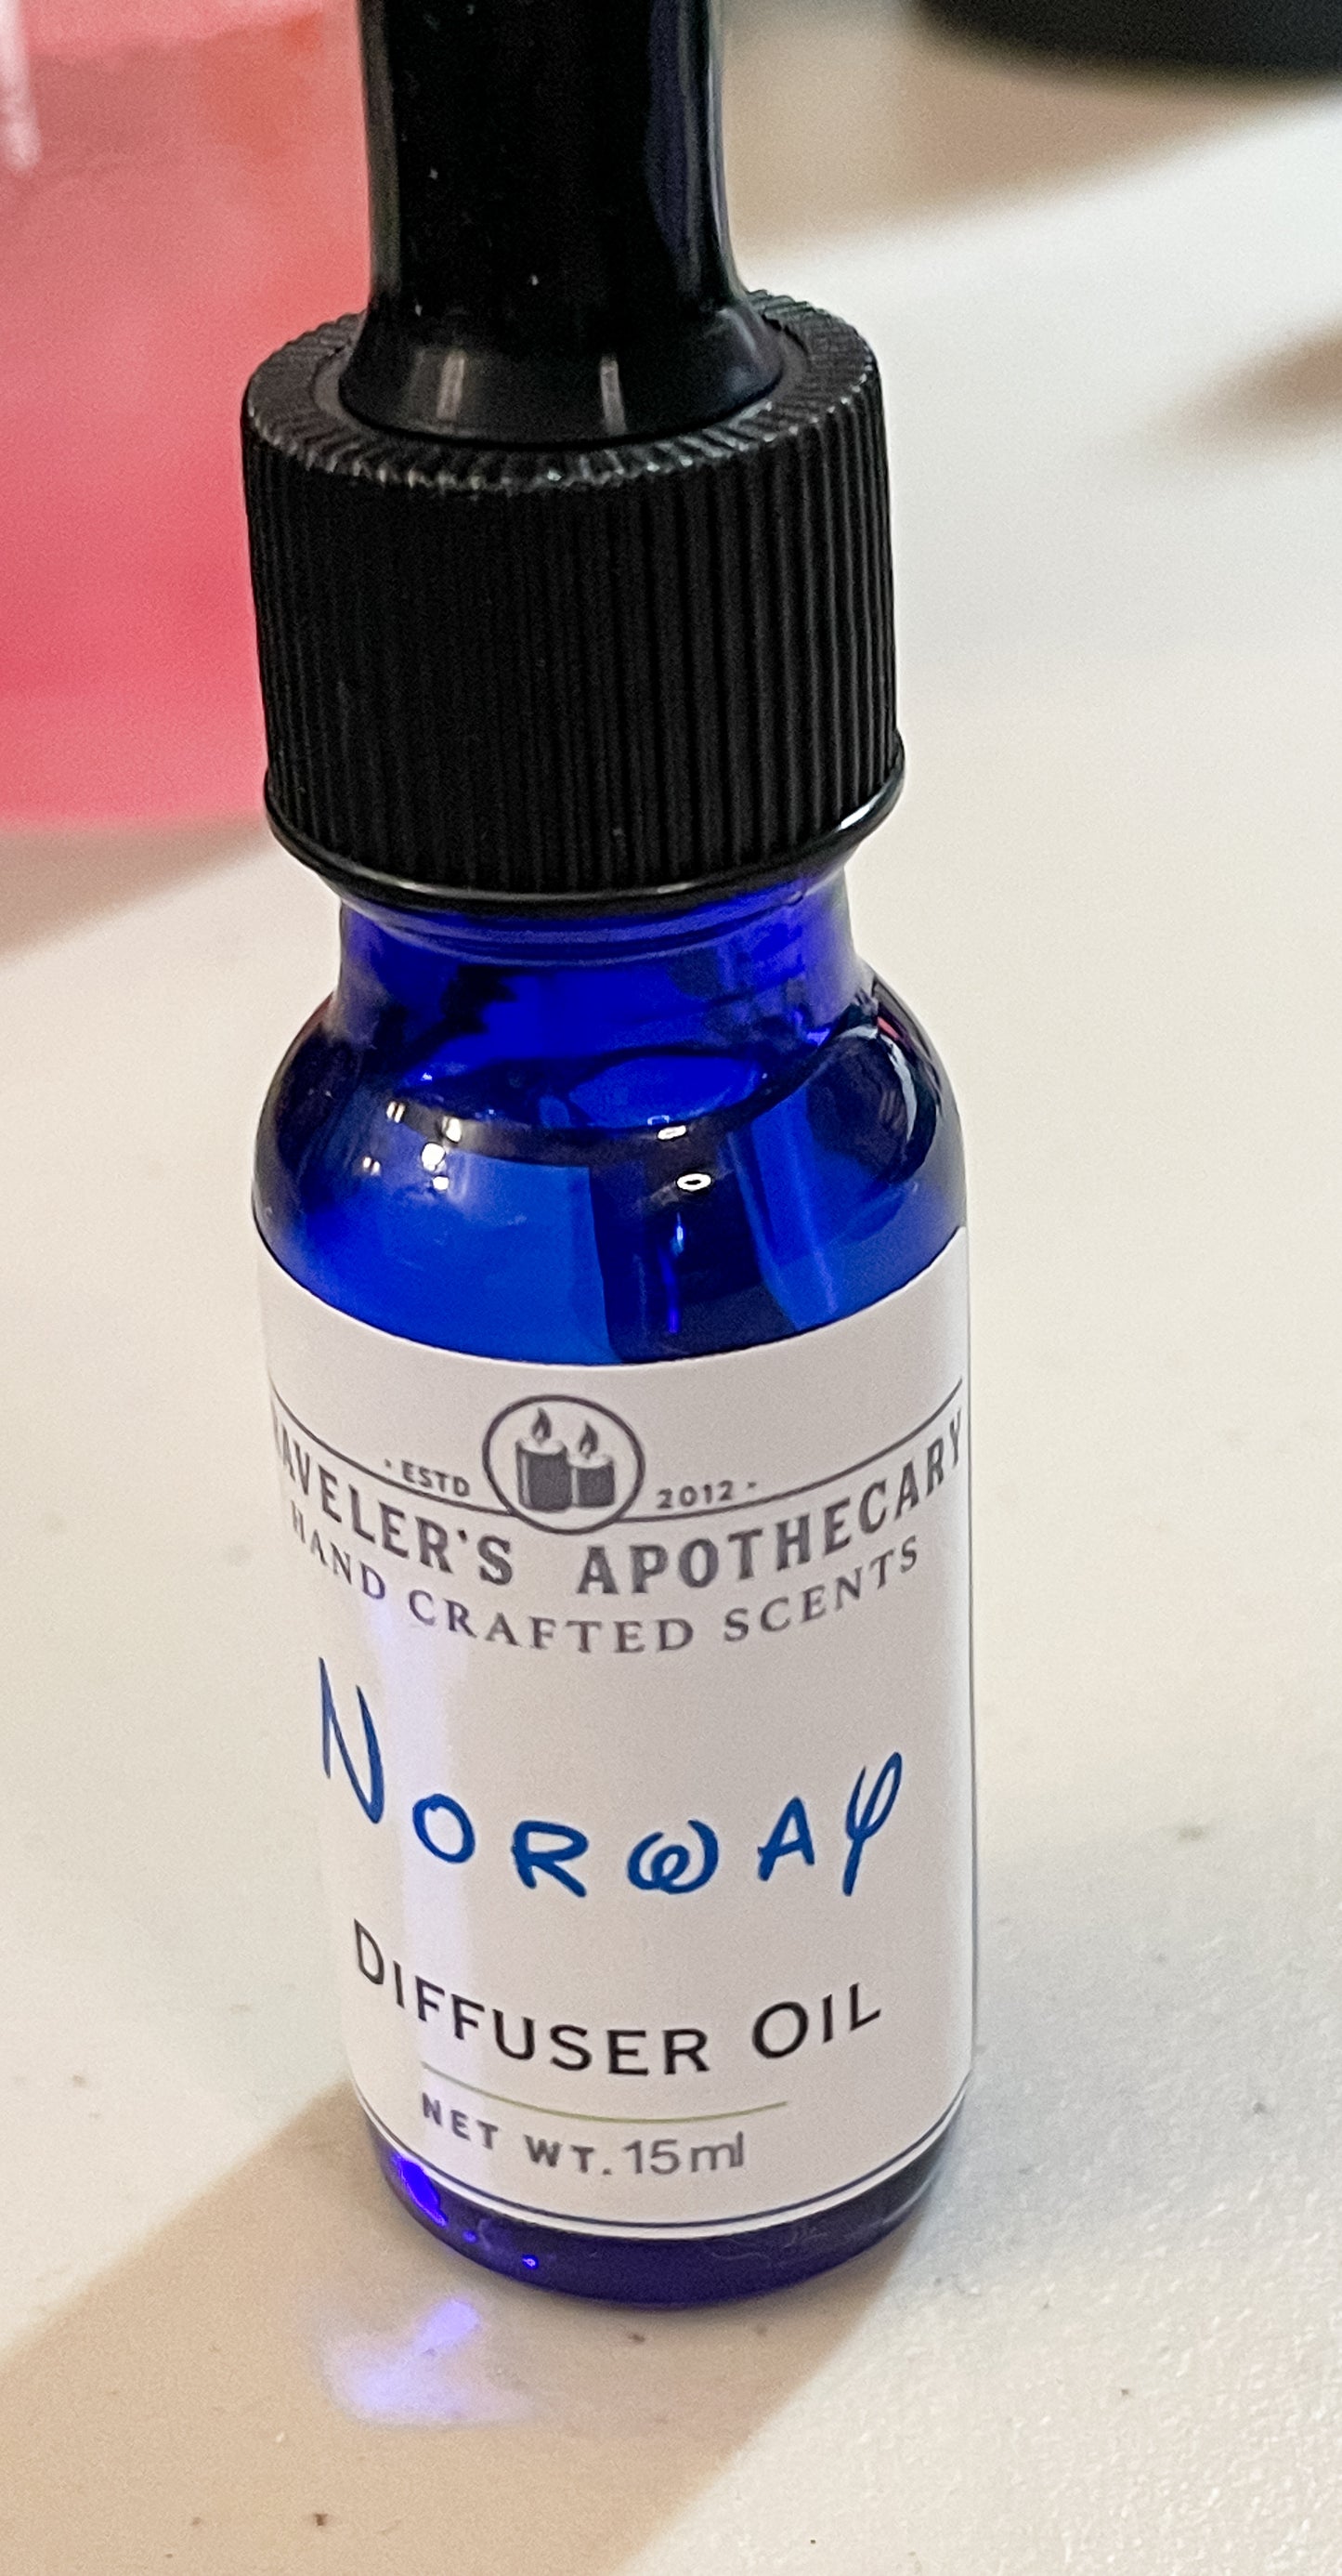 Traveler's Apothecary - Norway Diffuser Oil